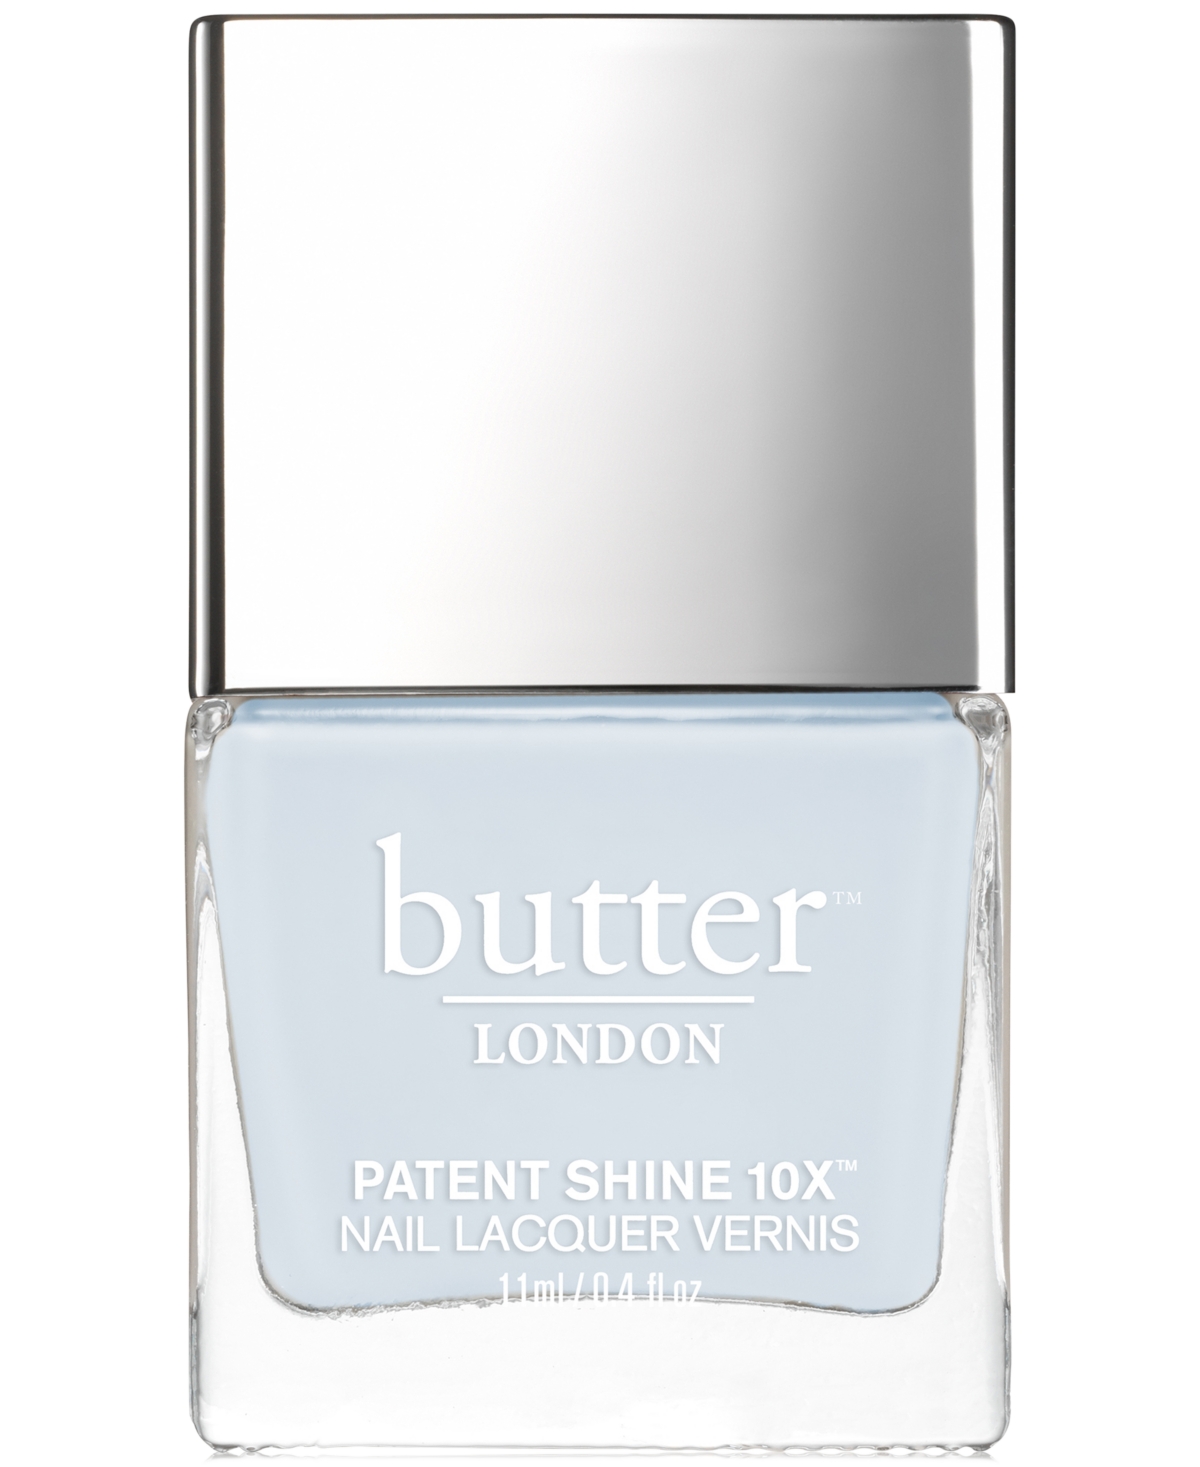 Butter London Patent Shine 10x Nail Lacquer In Candy Floss (soft Powder Blue Crã¨me)